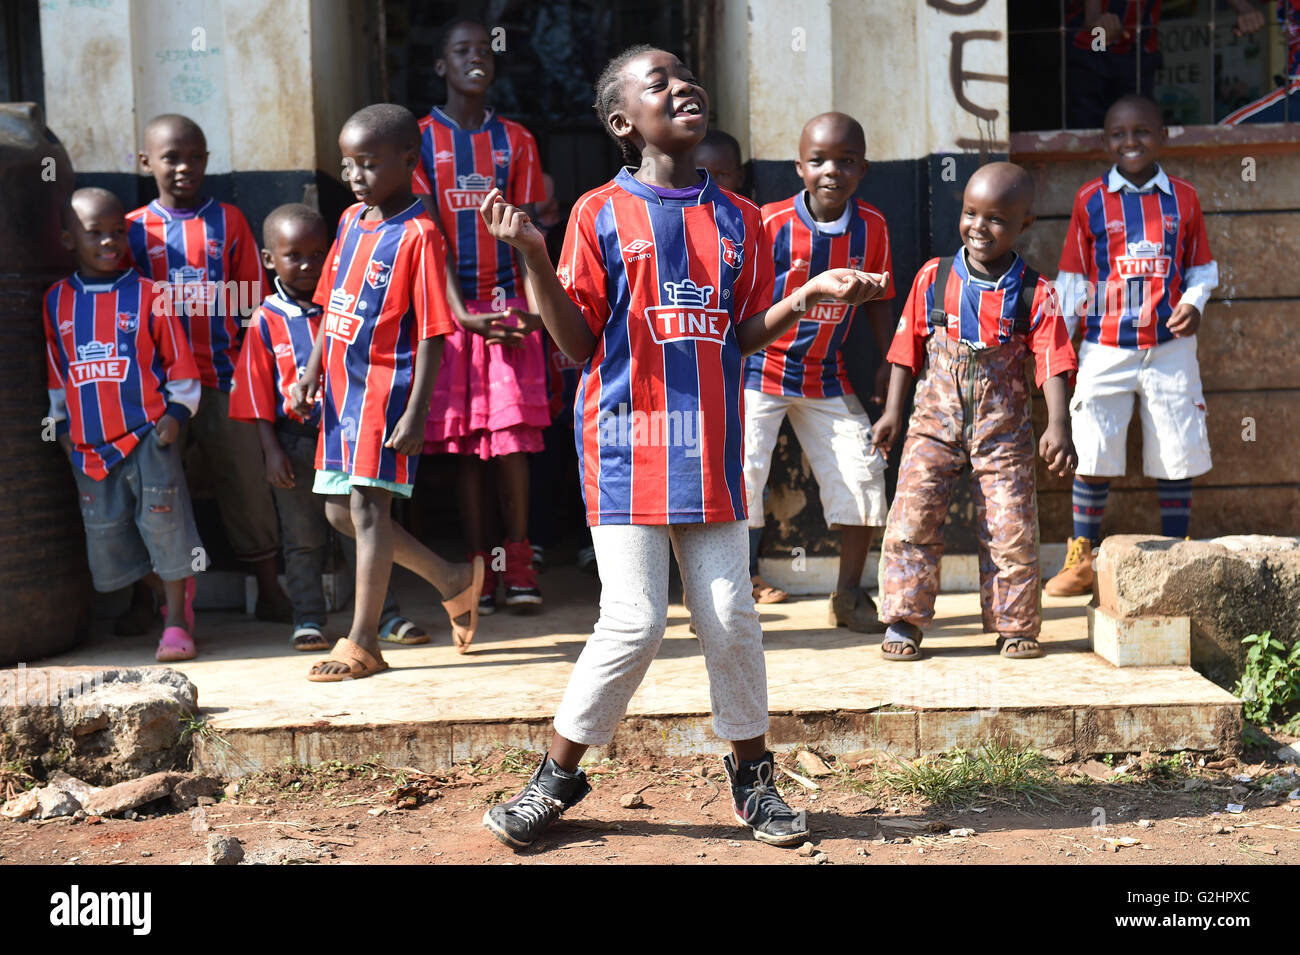 (160531) -- NAIROBI, May 31, 2016 (Xinhua) -- Photo taken on May 29, 2016 shows children singing rap songs and dancing at the Sejorooney Kids Talent Center, at the Mathare slums in Nairobi, Kenya. When the Kenyan duo of Dominic Senerwa and Joseph Mwangi acquired a disused building at the local police post in Mathare slums in Nairobi for philanthropic work, little did they know that their pet project would come to realization. Senerwa, 21, and Mwangi, 23, embarked on their charitable mission to turn around the lives of children from rundown homes within the informal settlement, having grown Stock Photo